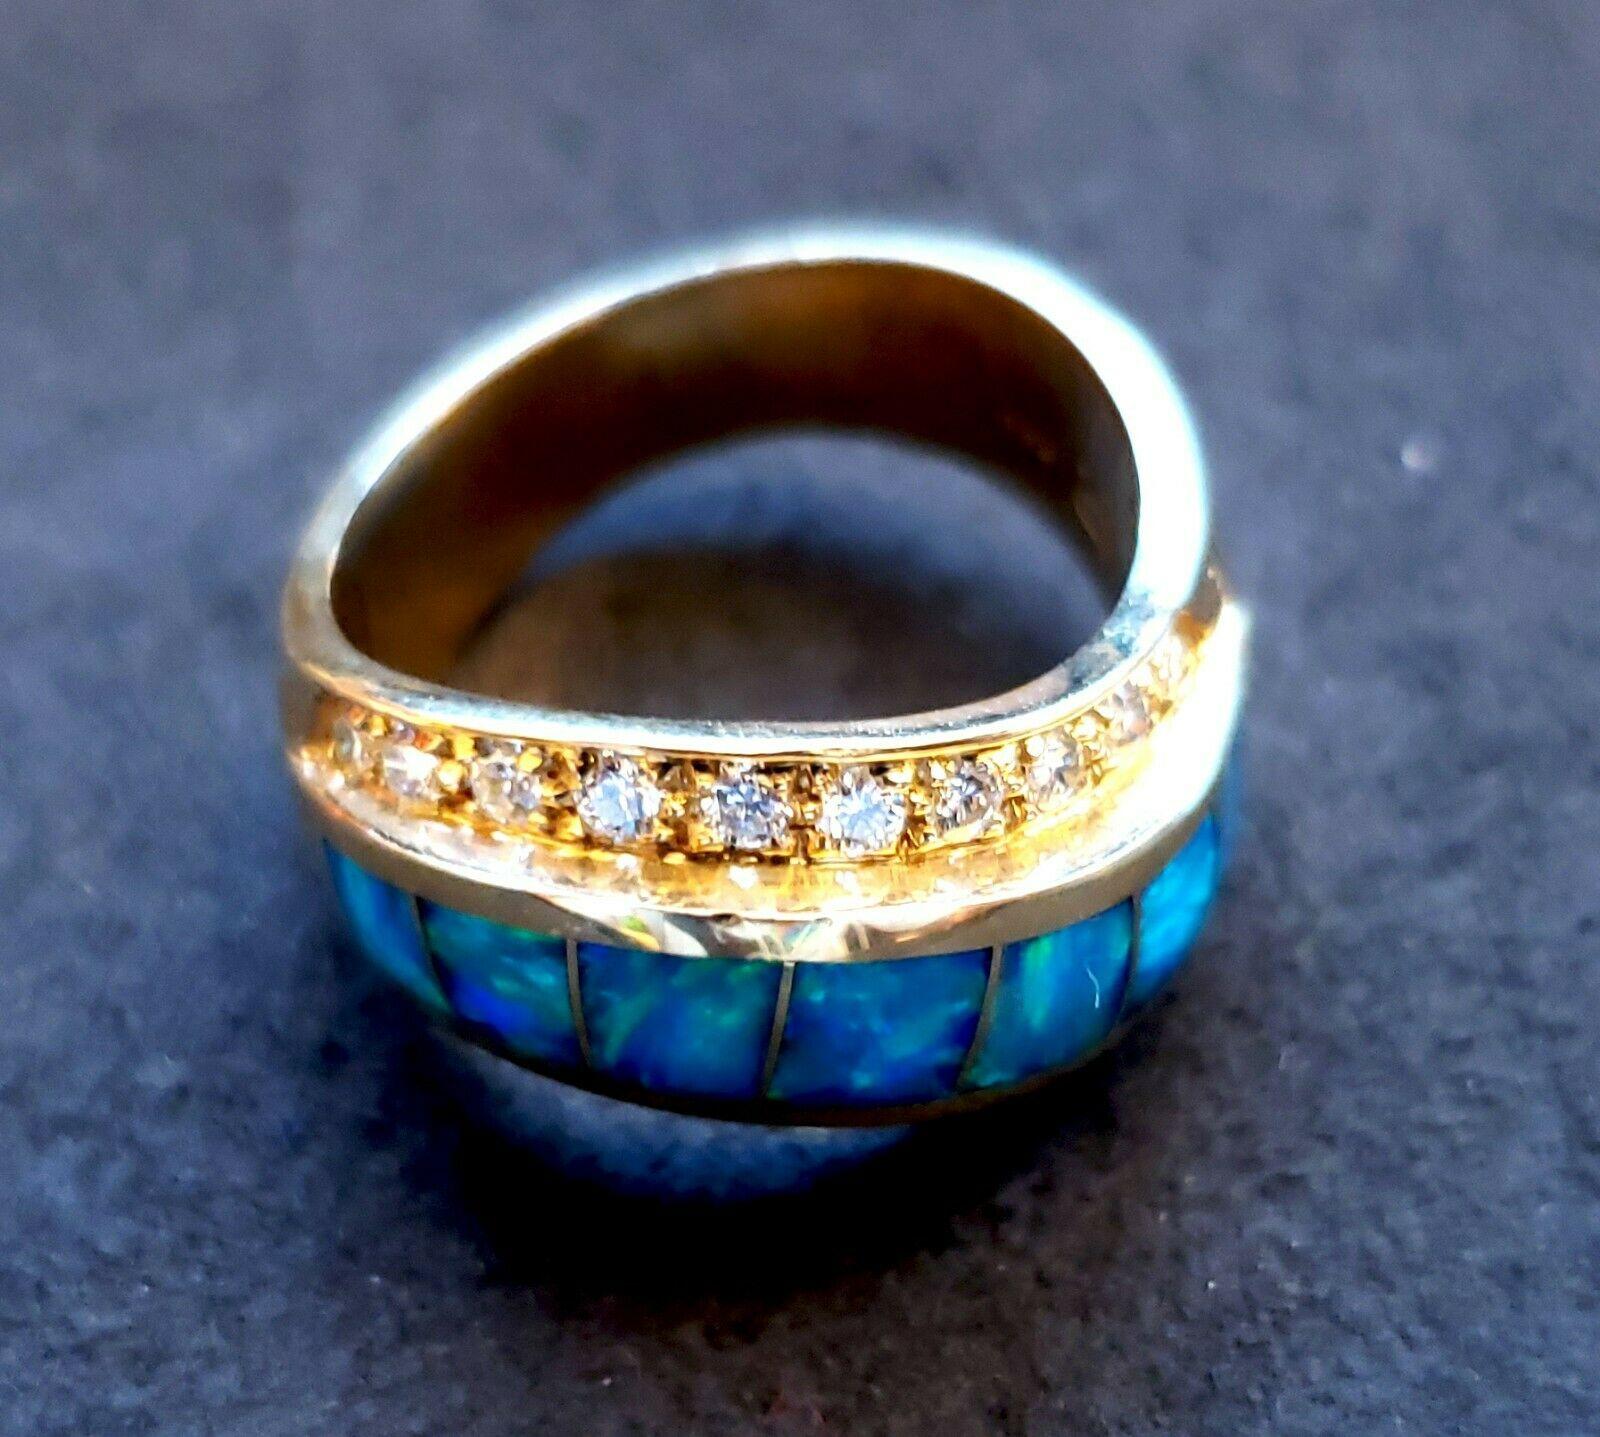 Baguette Cut 14 Karat Yellow Gold Inlaid Dublet Opal Ring It Consists of 7 Square Opals Lined